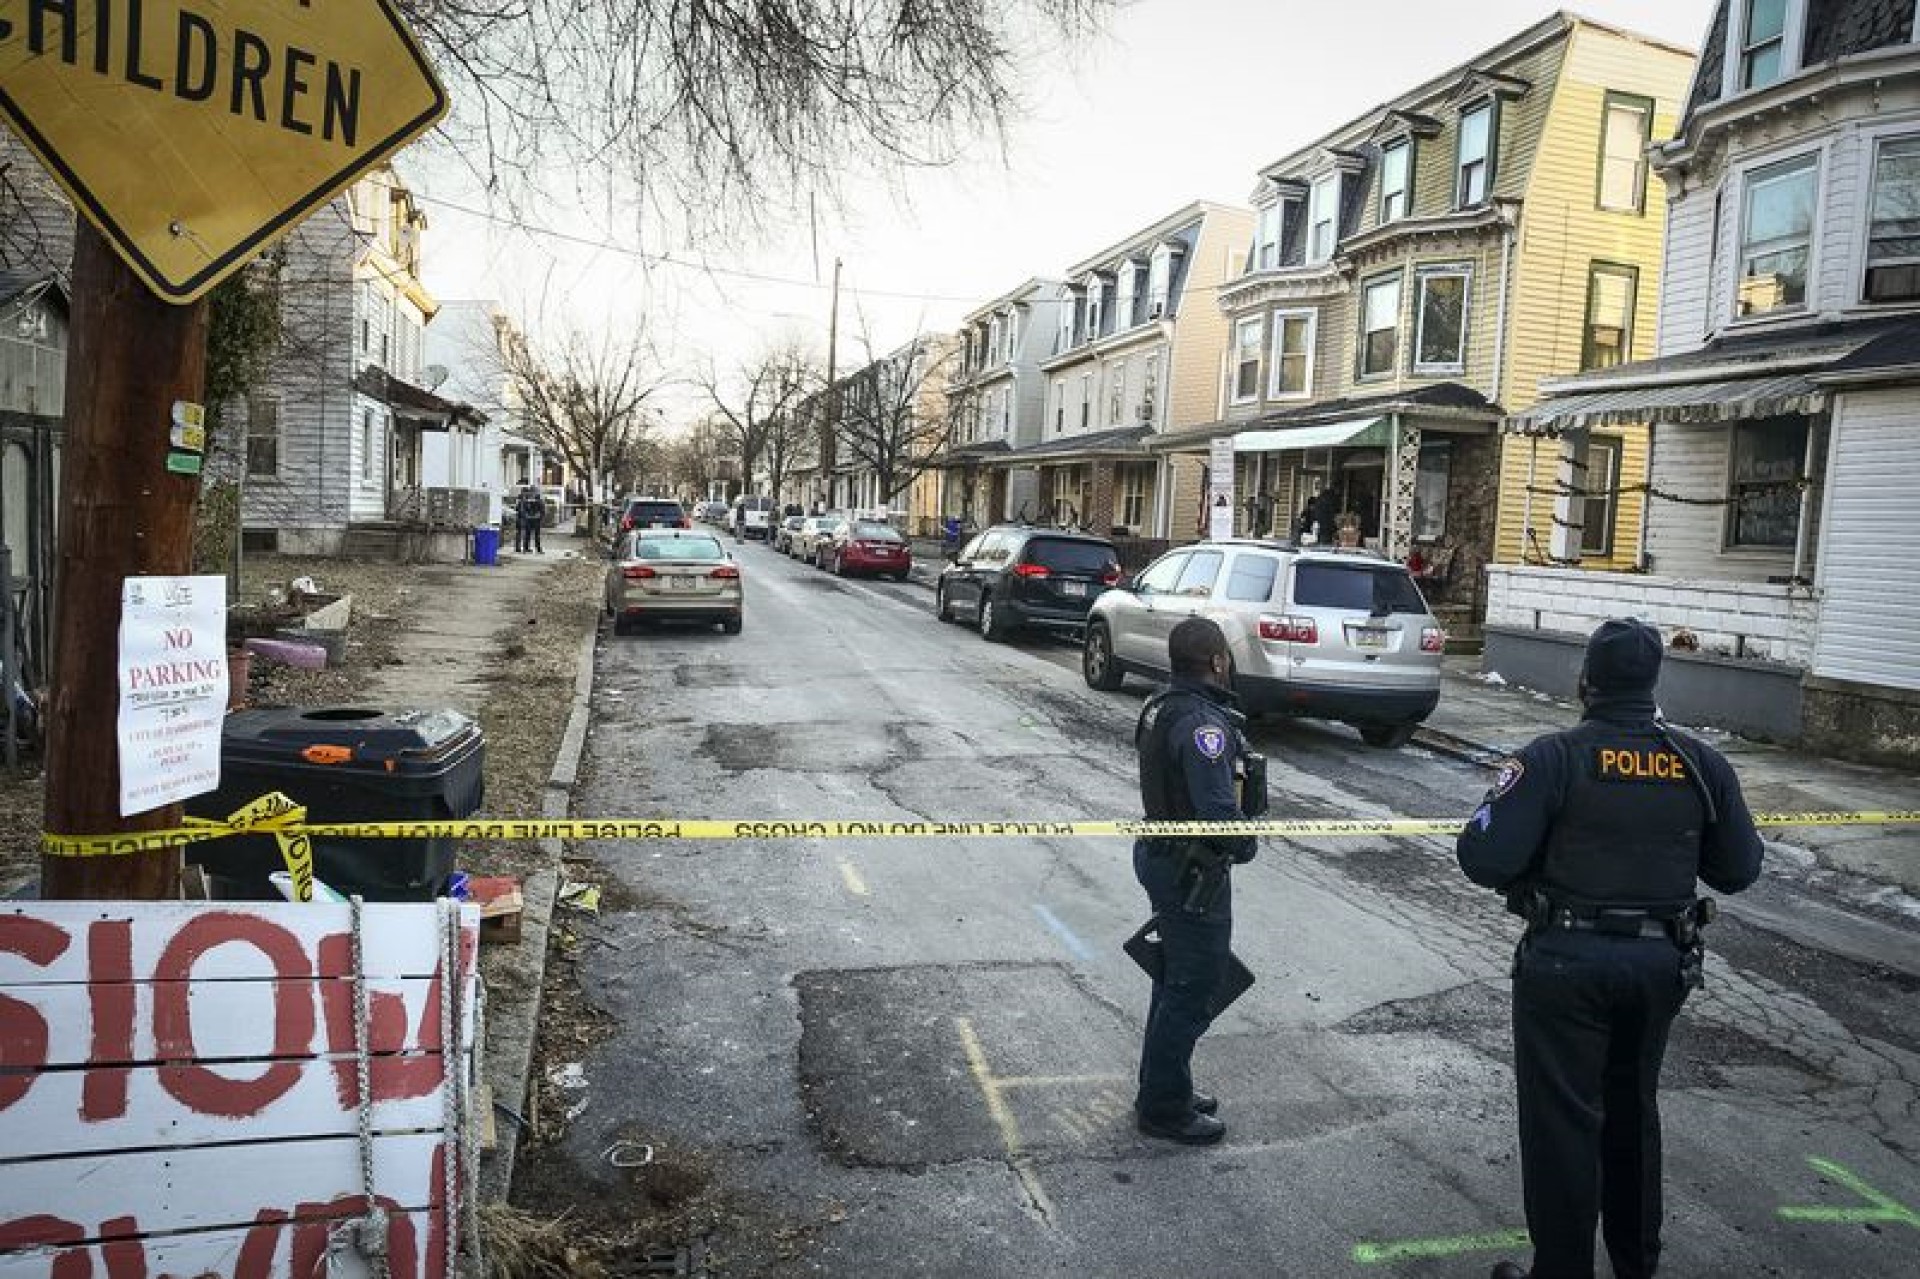 Harrisburg police investigate a shooting in the 1300 block of Liberty Street, near State Street in Harrisburg on the morning of Feb. 9, 2022